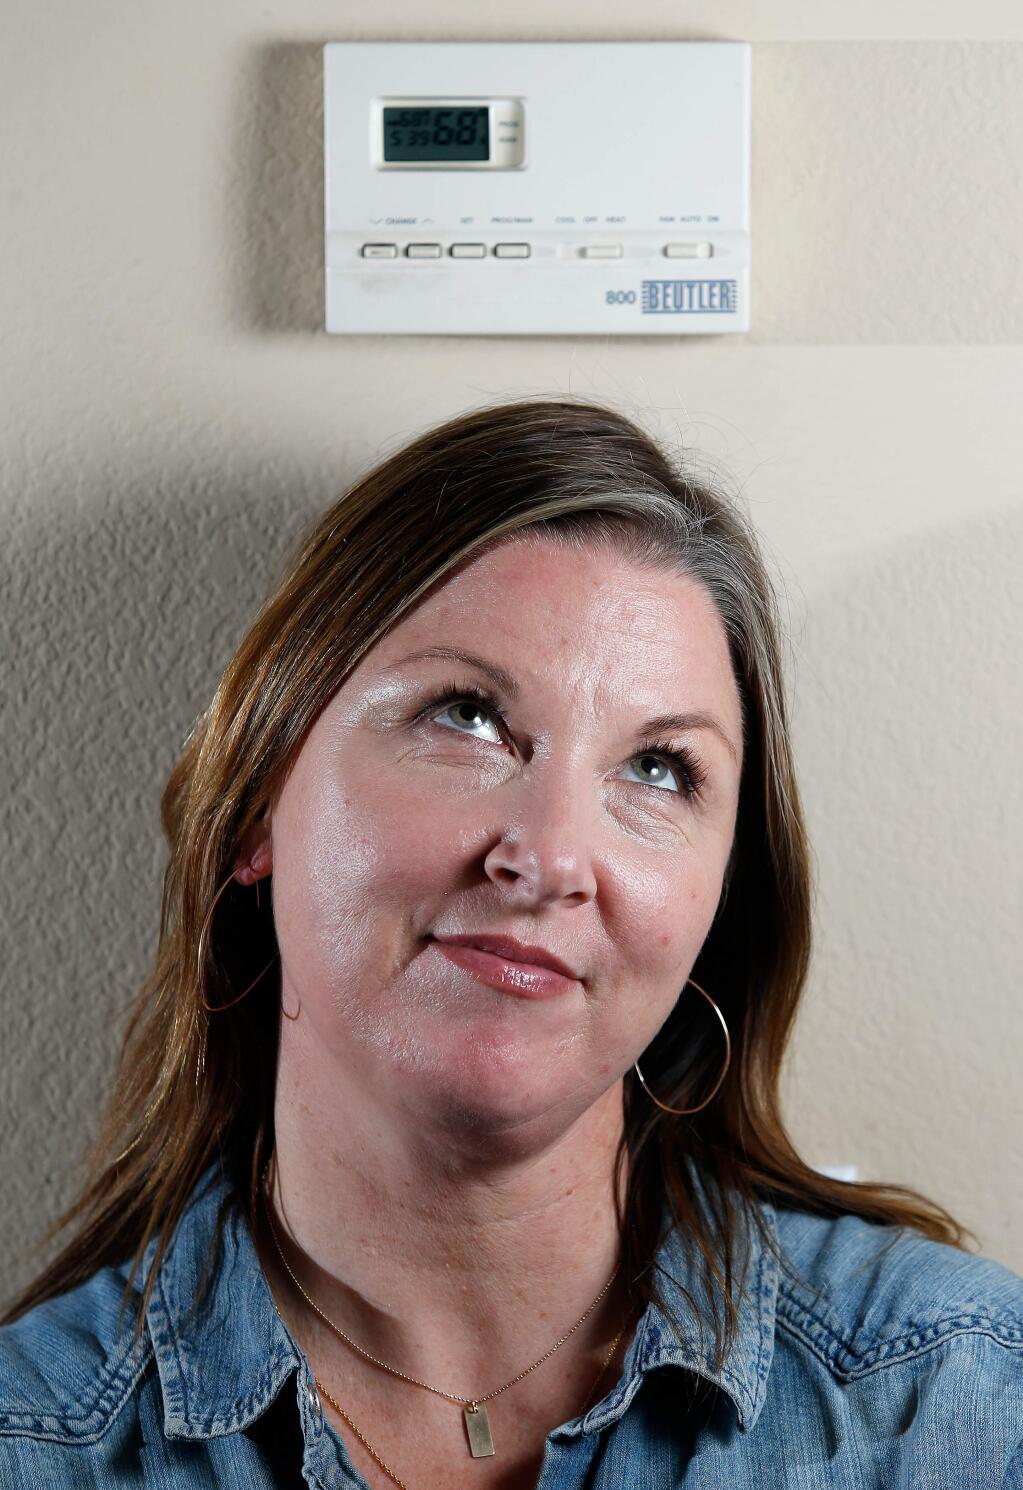 Nicole Reyes poses for a portrait beside the thermostat at her home in Petaluma, California on Wednesday, January 11, 2017. Reyes' home heating bill jumped over $200 since last November. (Alvin Jornada / The Press Democrat)